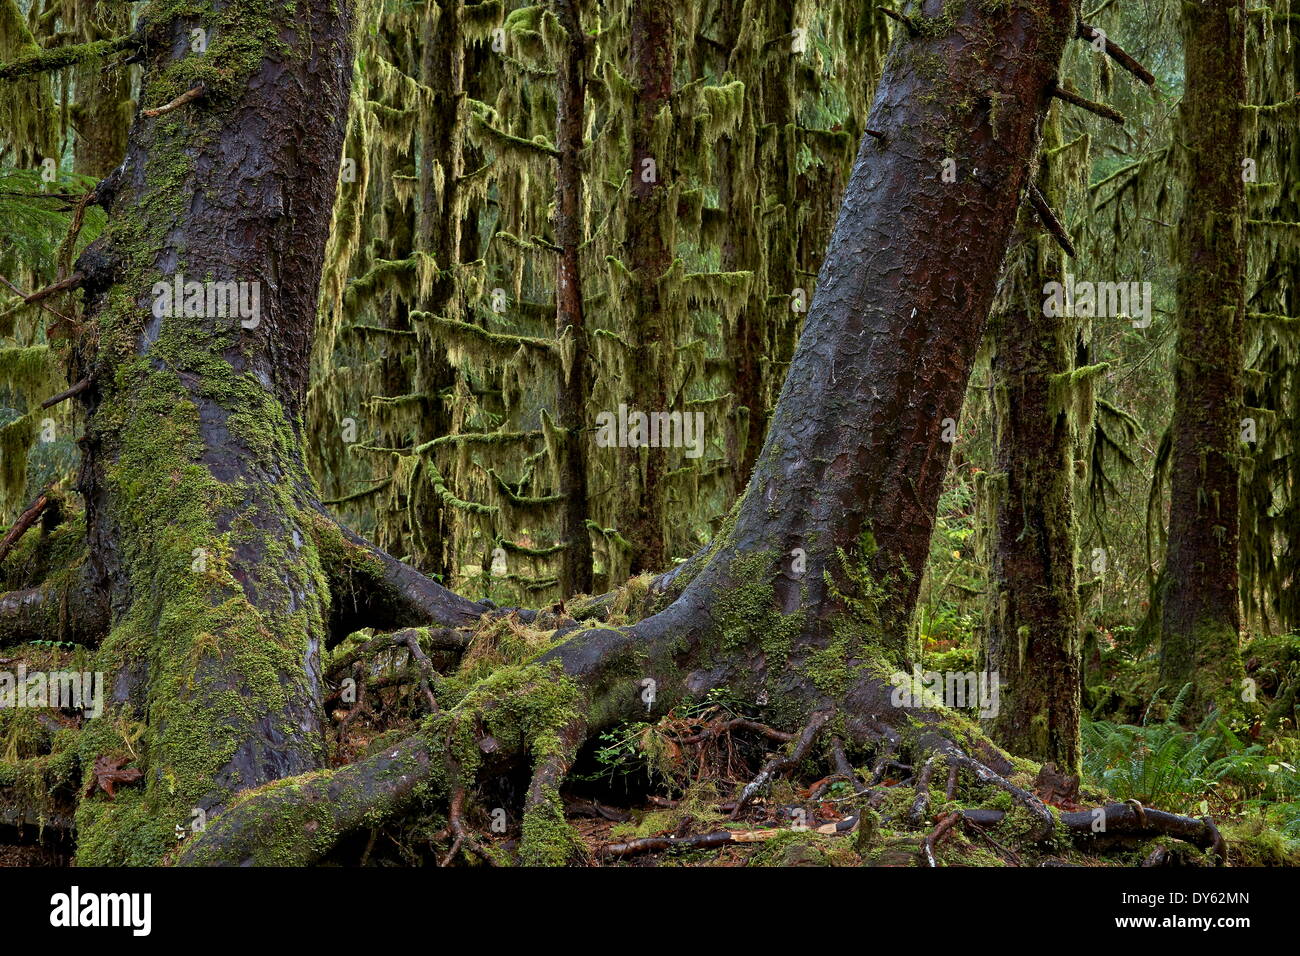 Moss-covered tree trunks in the rainforest, Olympic National Park, UNESCO Site, Washington, USA Stock Photo